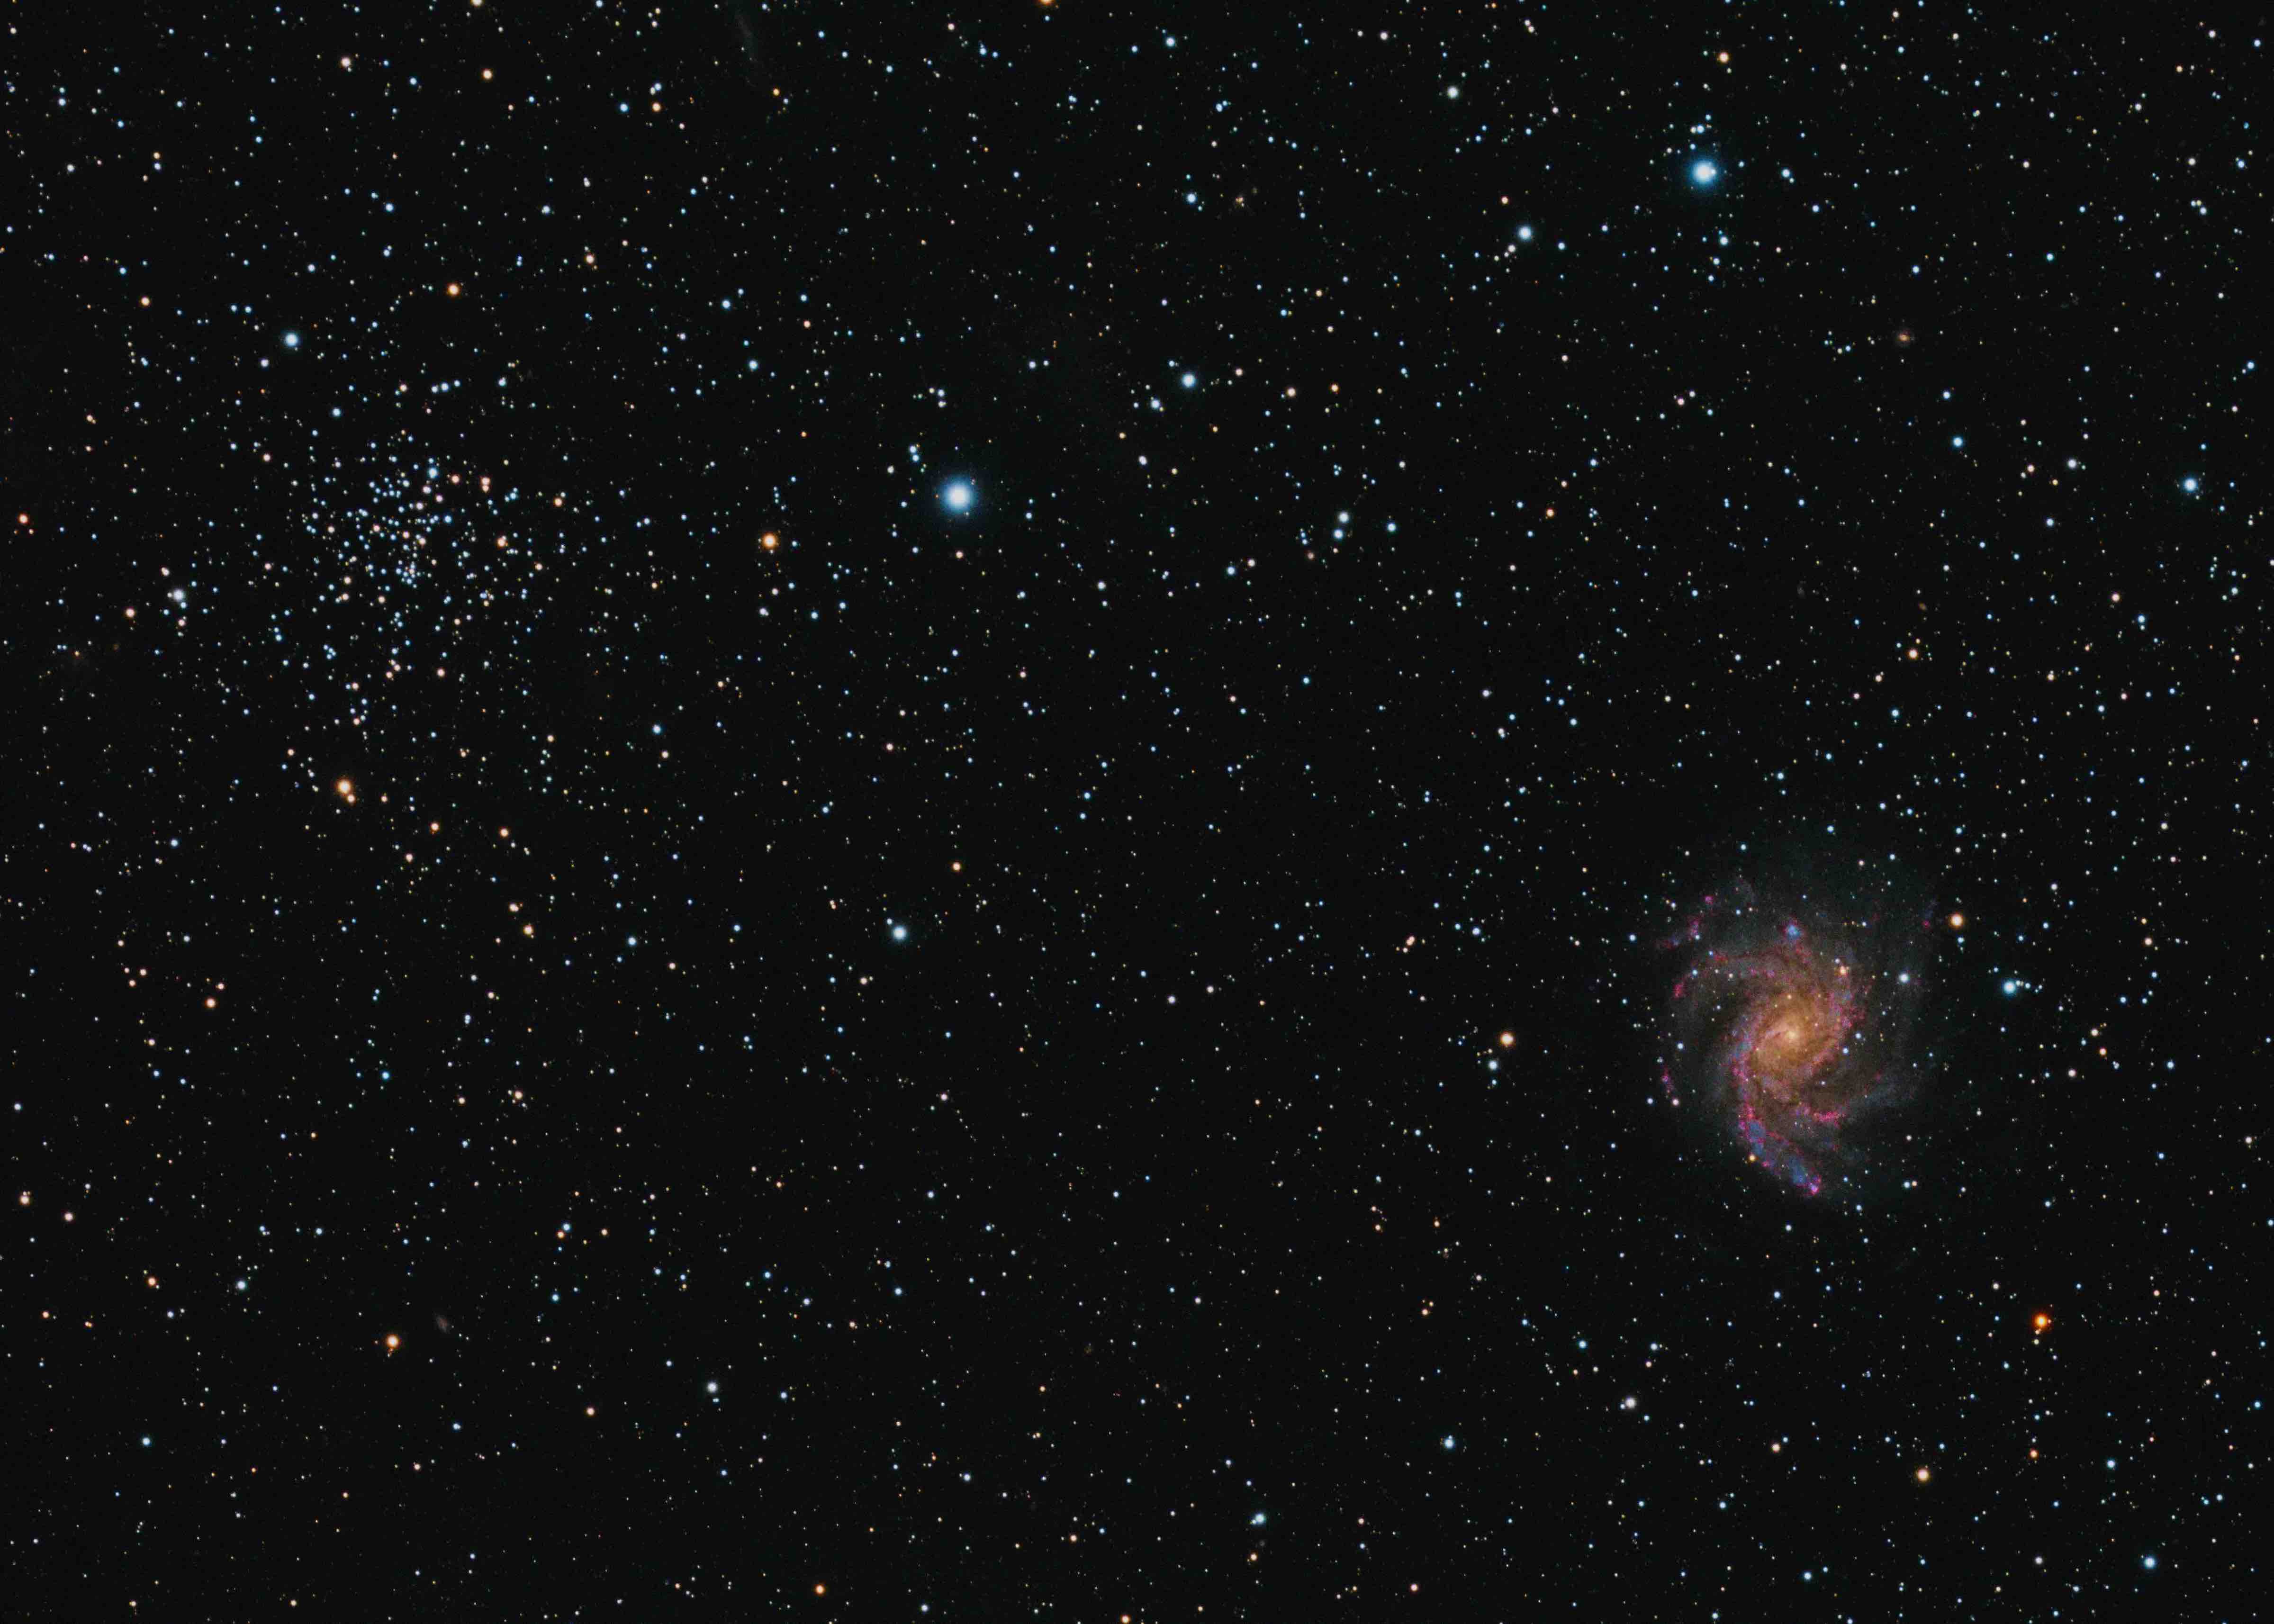 an image of the Fireworks galaxy (NGC 6946) next to the open star cluster NGC 6939 